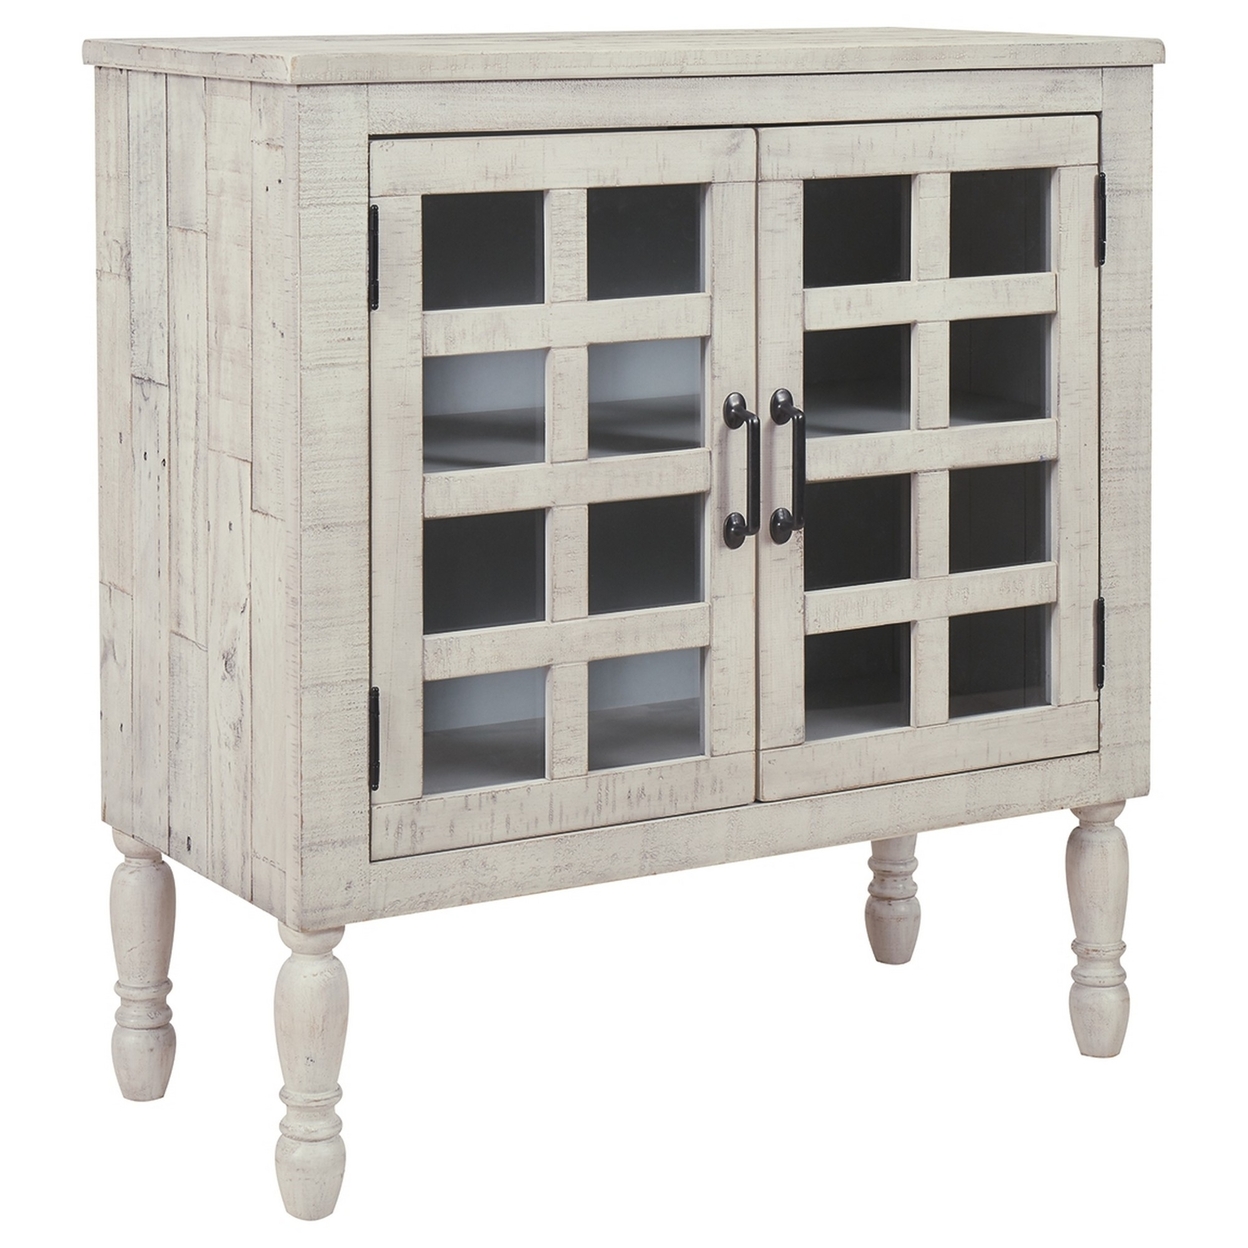 2 Glass Inlay Door Wooden Accent Cabinet With Turned Legs, Antique White- Saltoro Sherpi